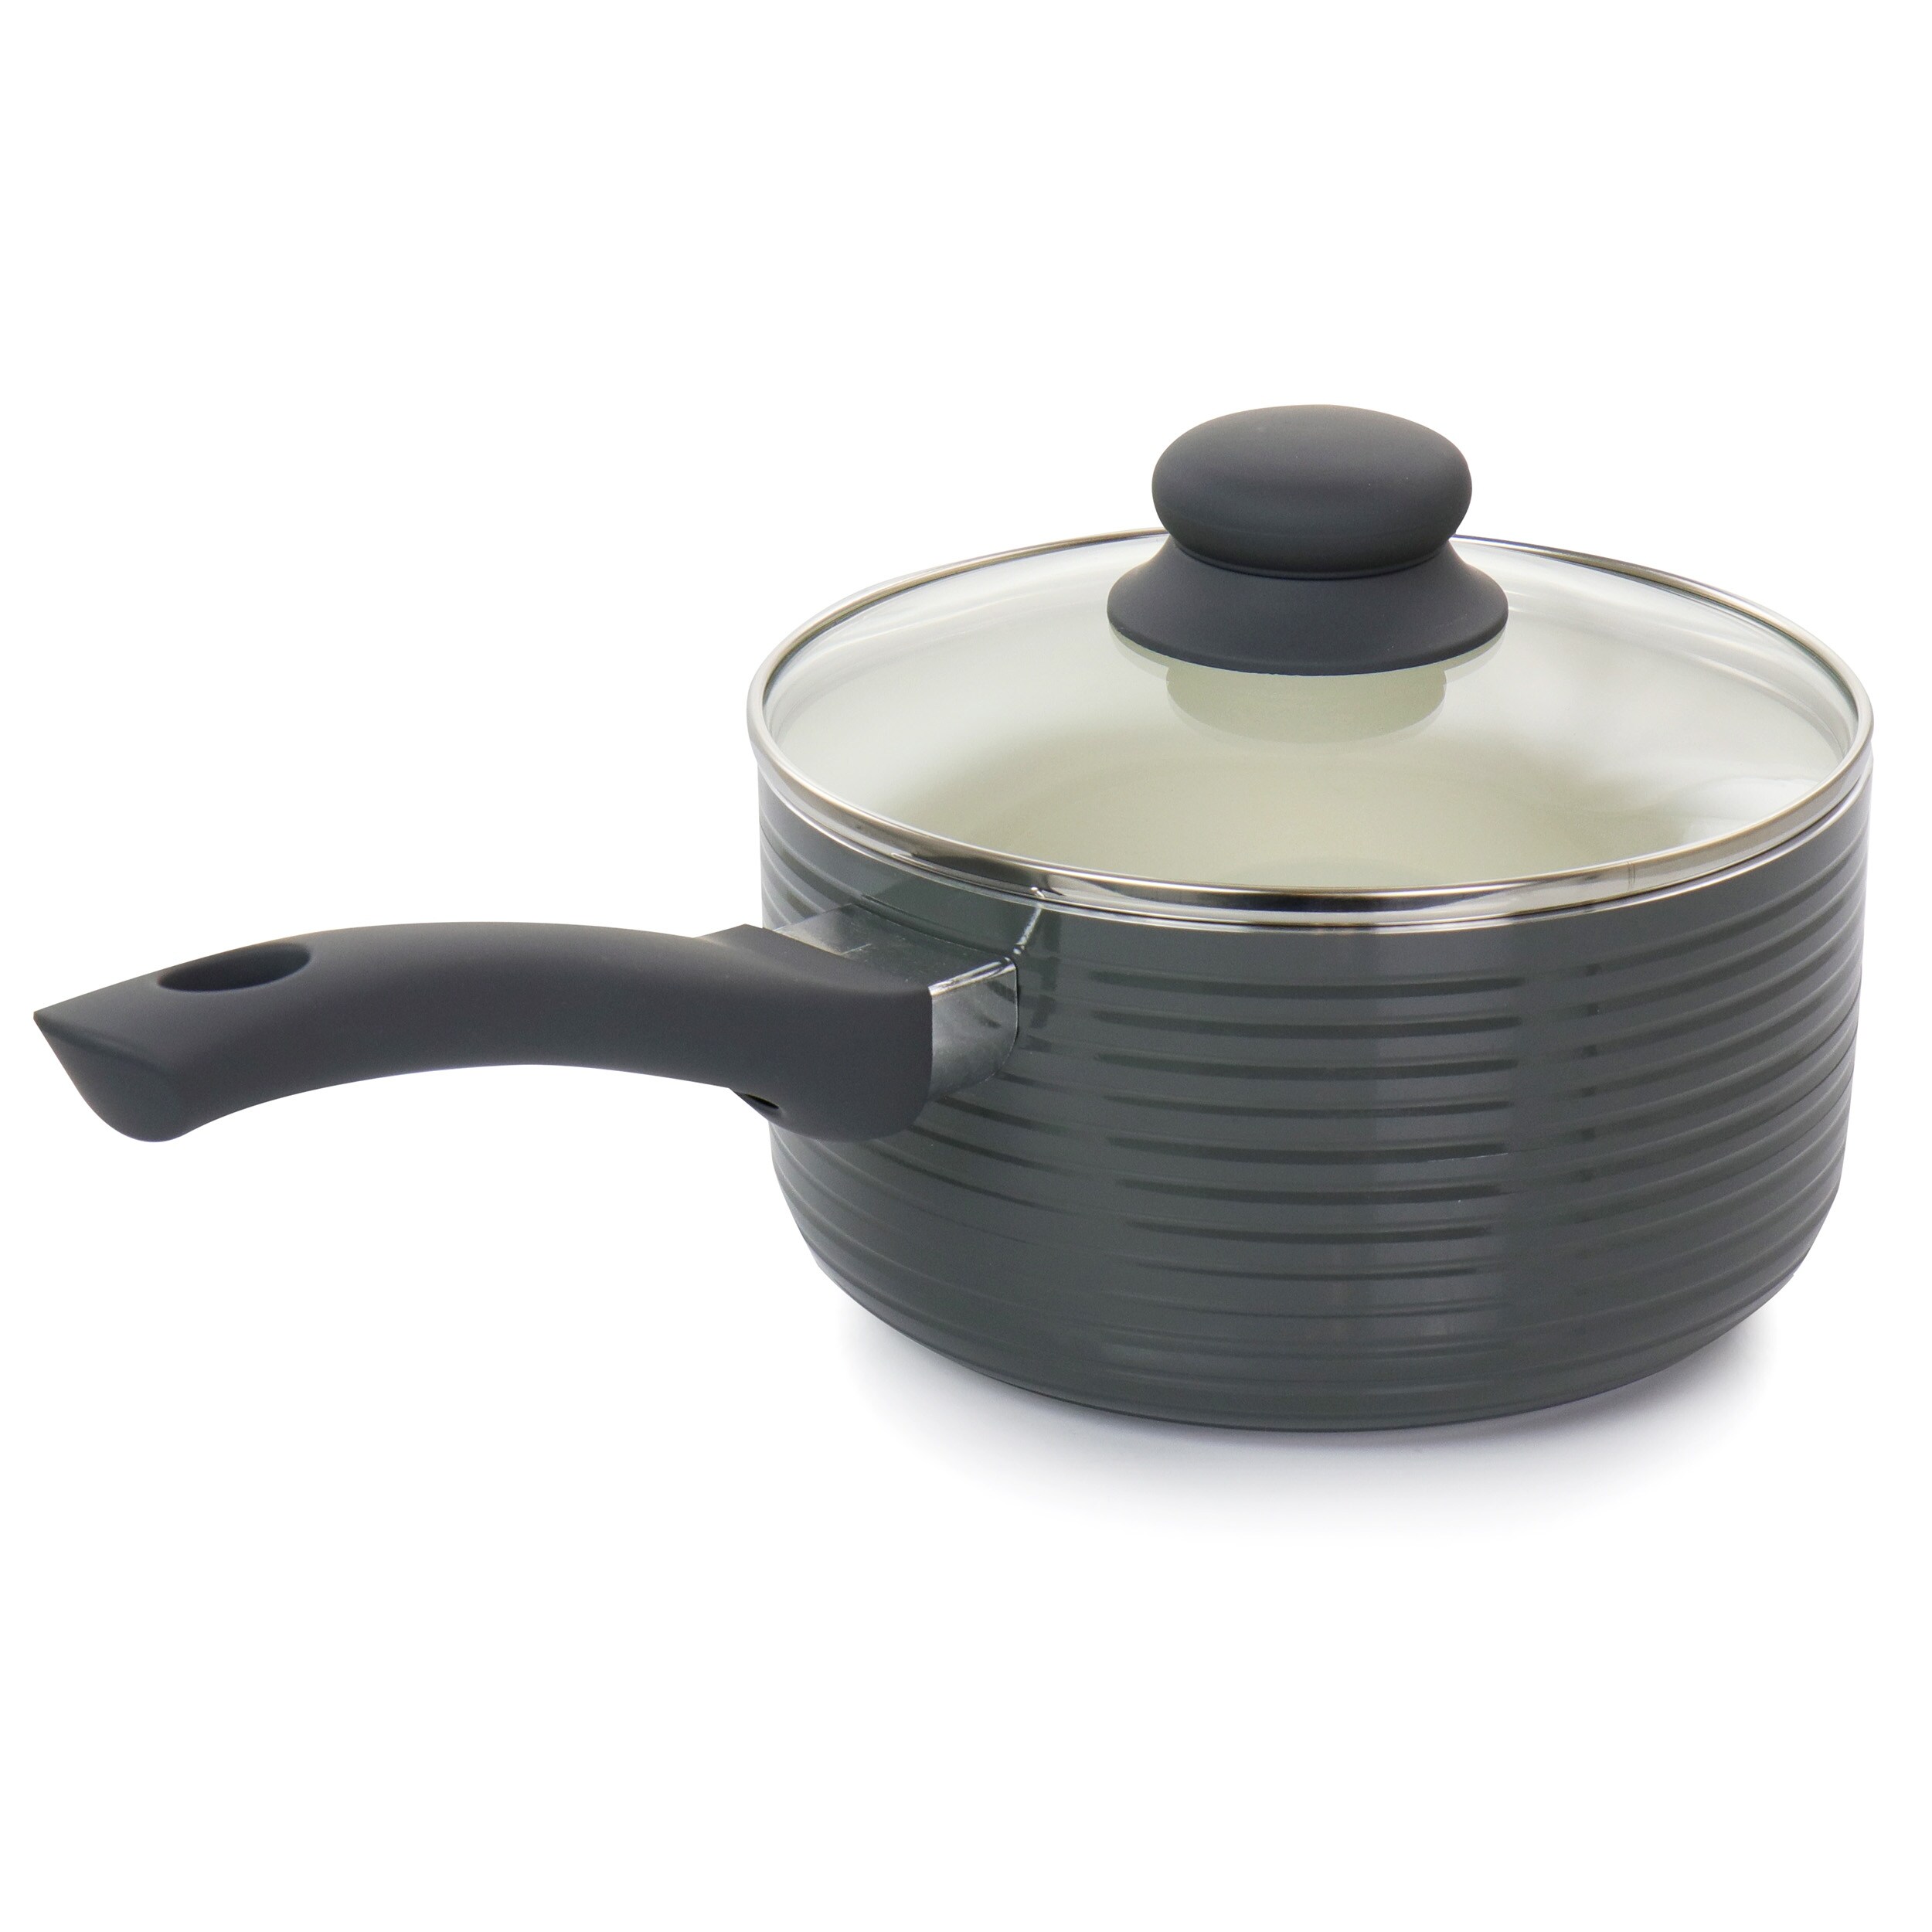 https://ak1.ostkcdn.com/images/products/is/images/direct/3cedf788554d6dfdd12f3eaa6c79017a5ee71150/Oster-2.5-Quart-Nonstick-Aluminum-Saucepan-with-Lid-in-Gray.jpg